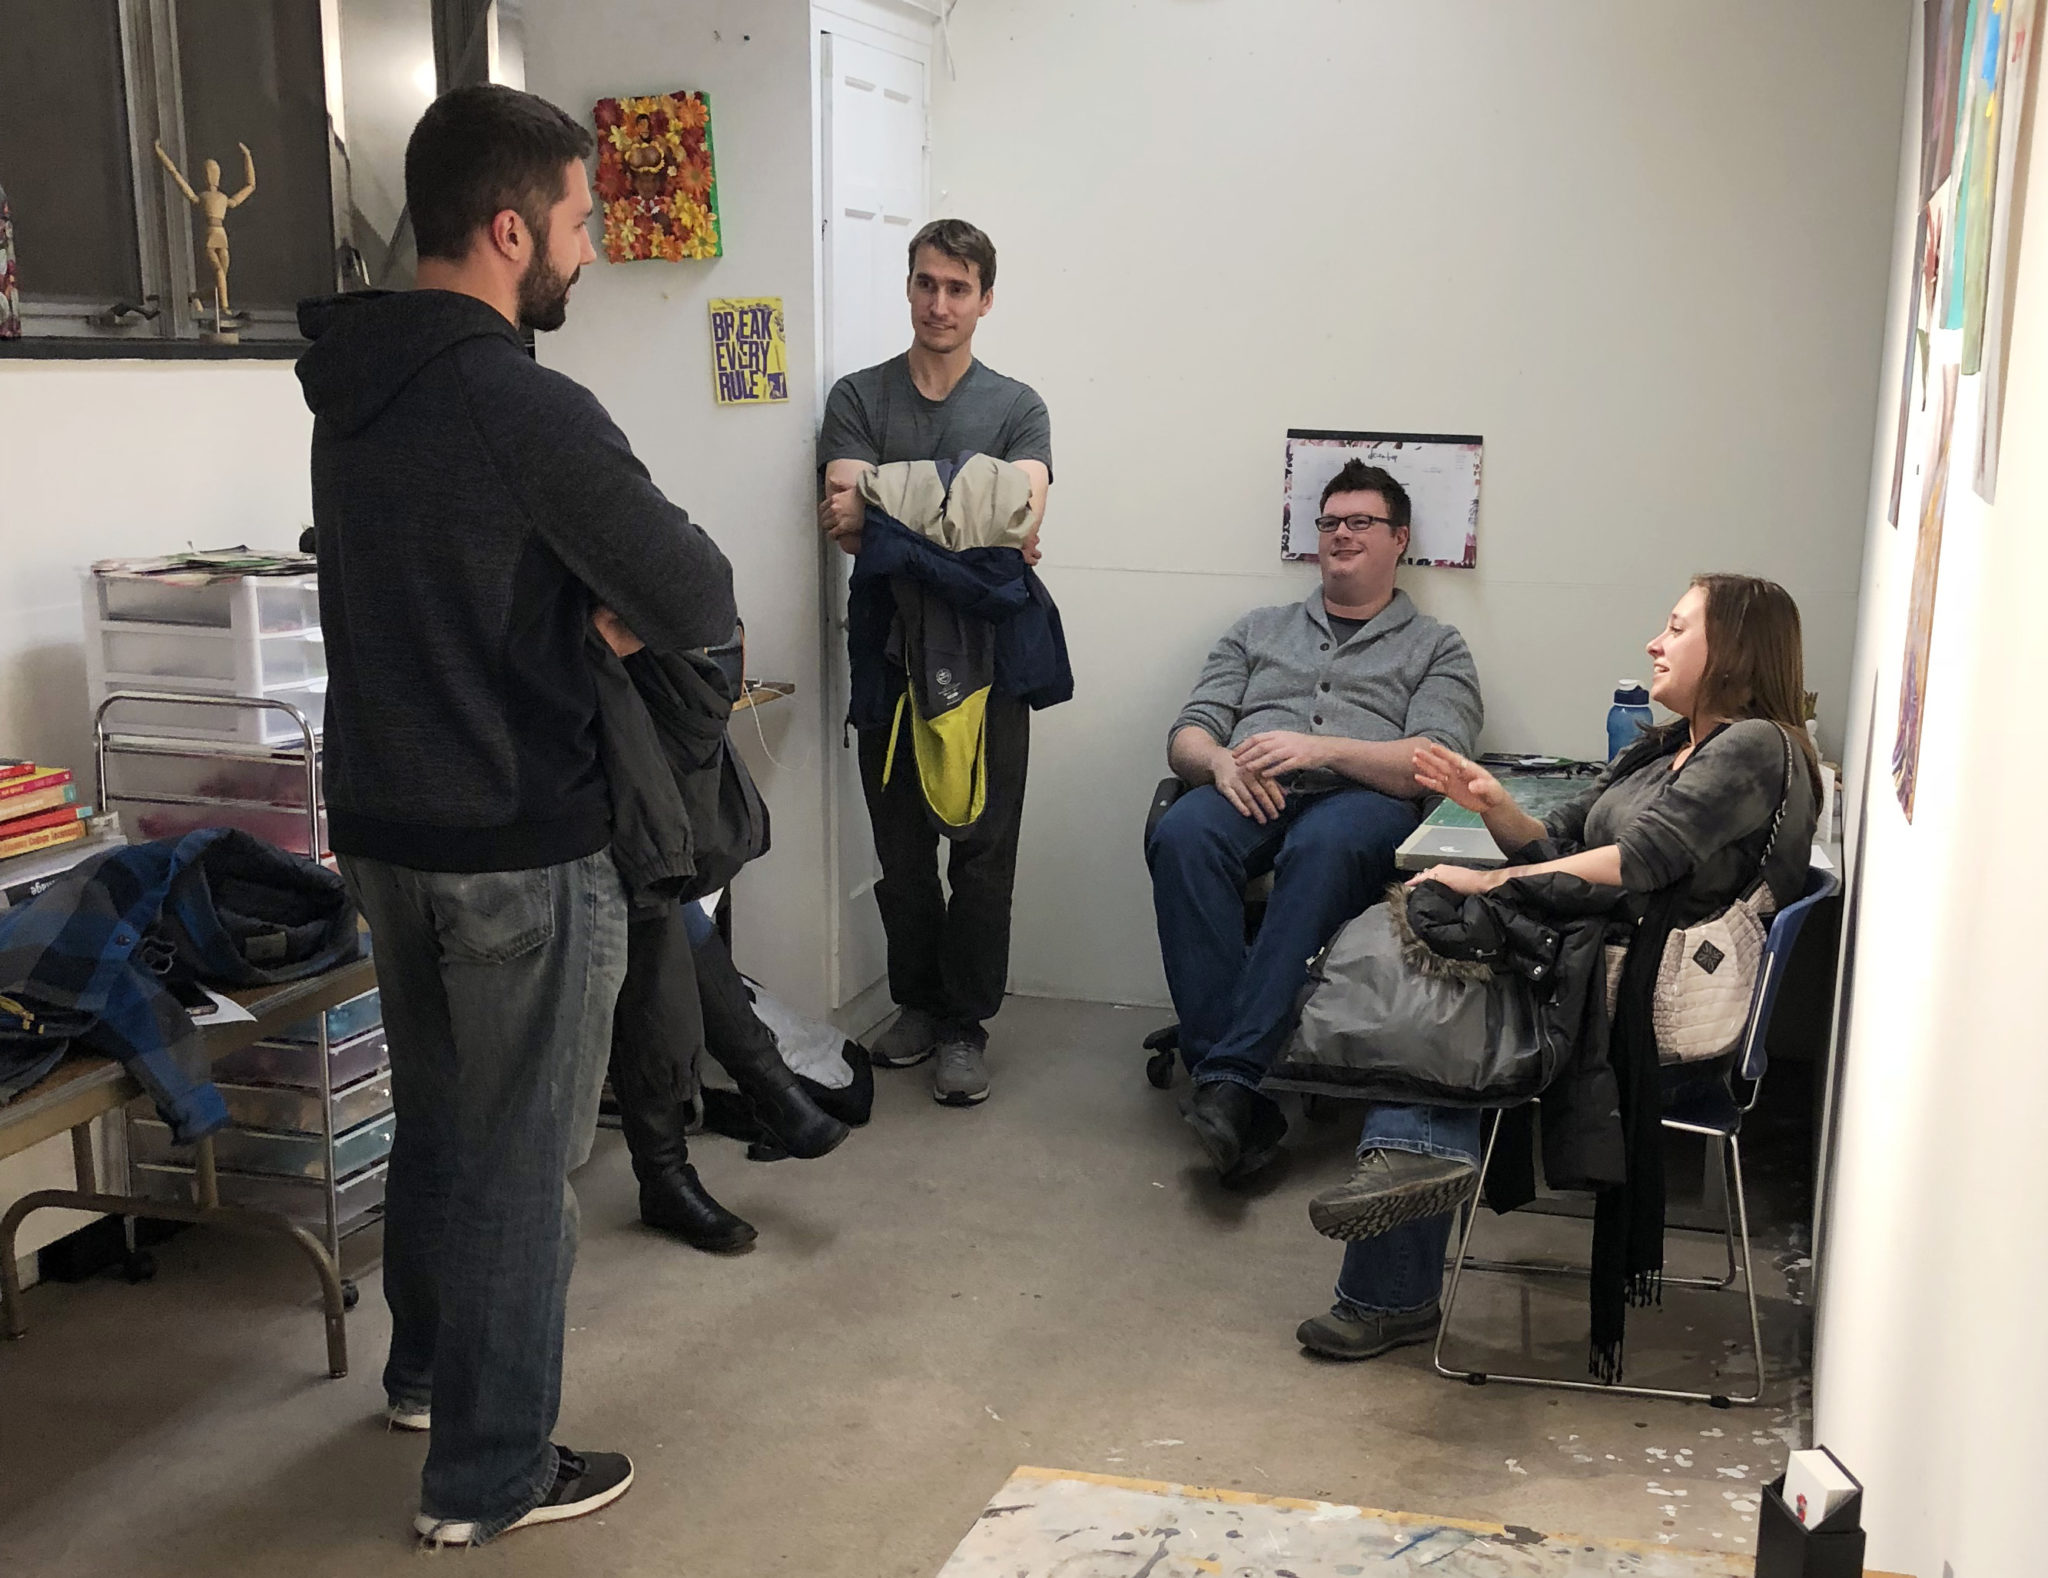 Student Kyle Voss engaging with studio visitors at Open Studio Night 2019